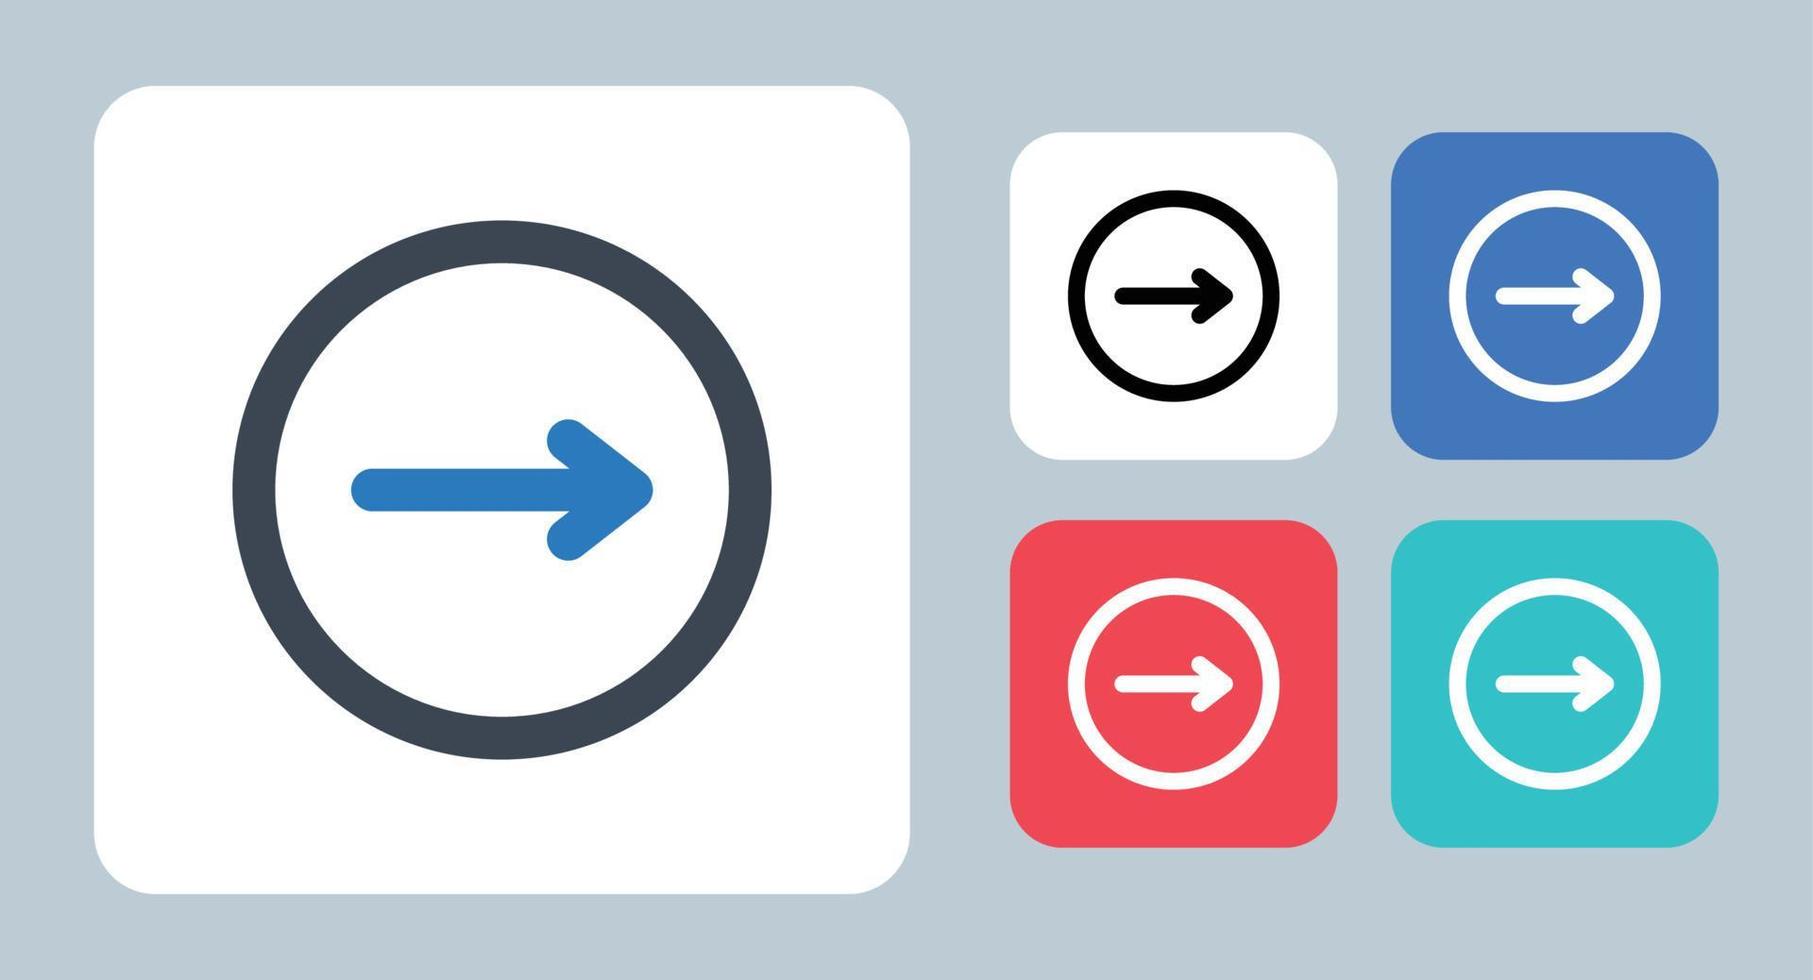 Right Arrow icon - vector illustration . Arrow, Forward, Next, Right, Direction, Circle, Move, Ui, line, outline, flat, icons .